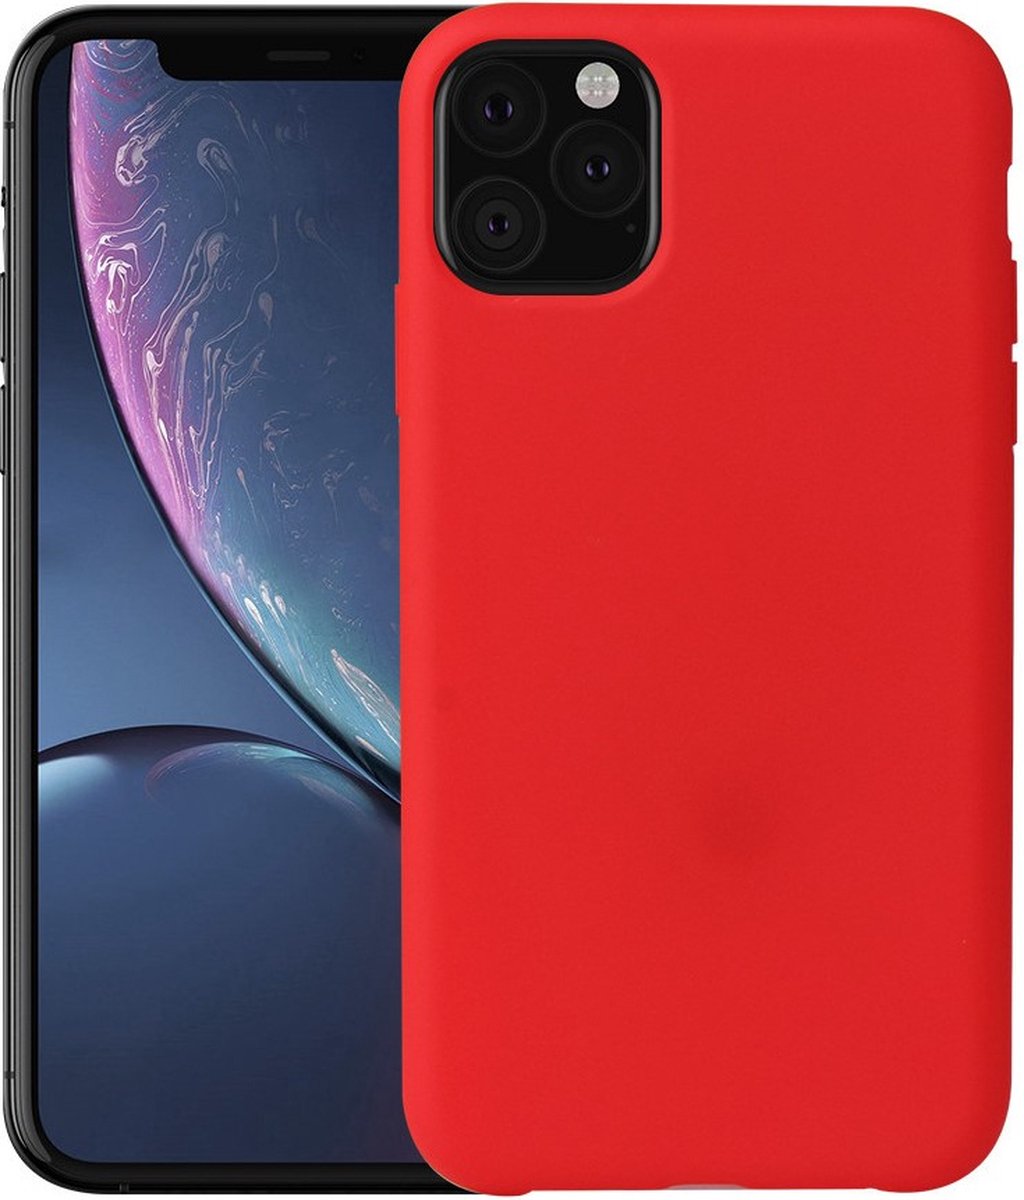 Peachy Zacht Silky iPhone 11 Red Case TPU hoesje - Rood